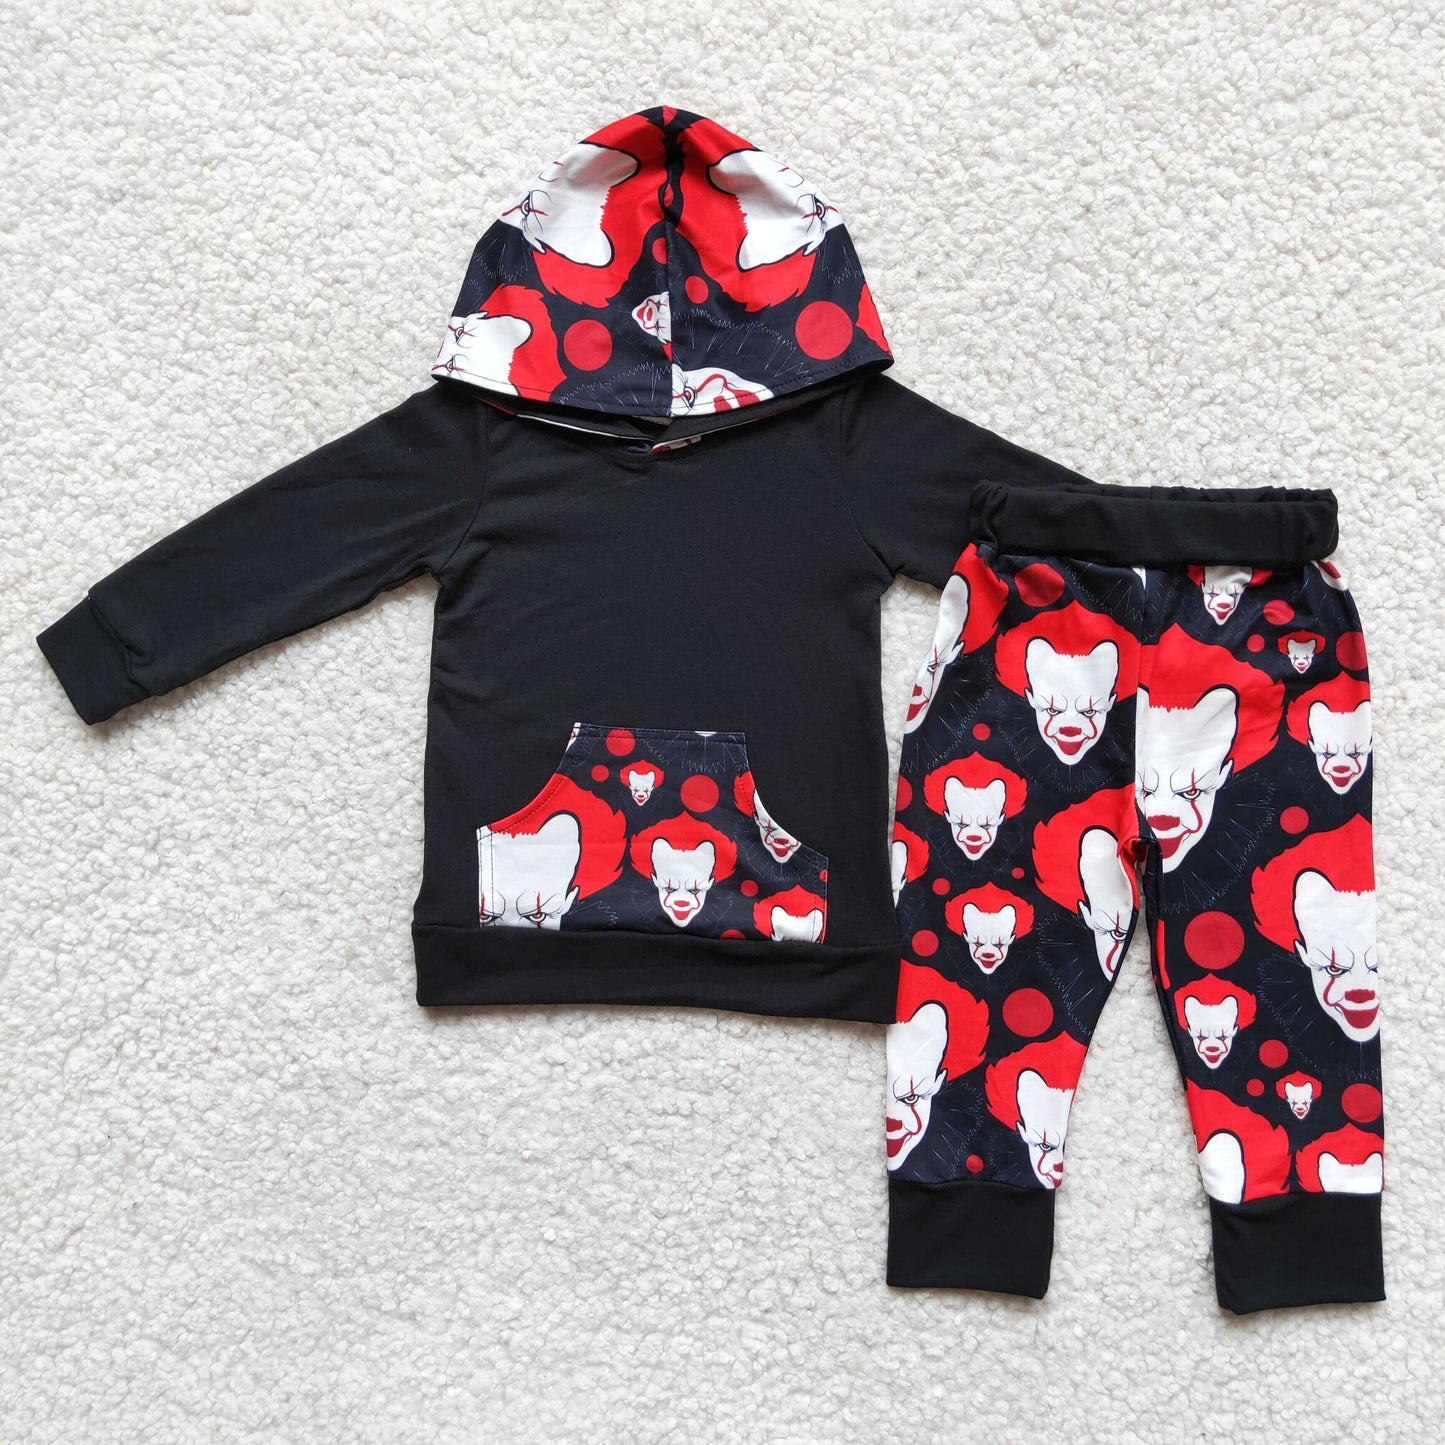 black red clown hoodie outfit boy halloween clothing